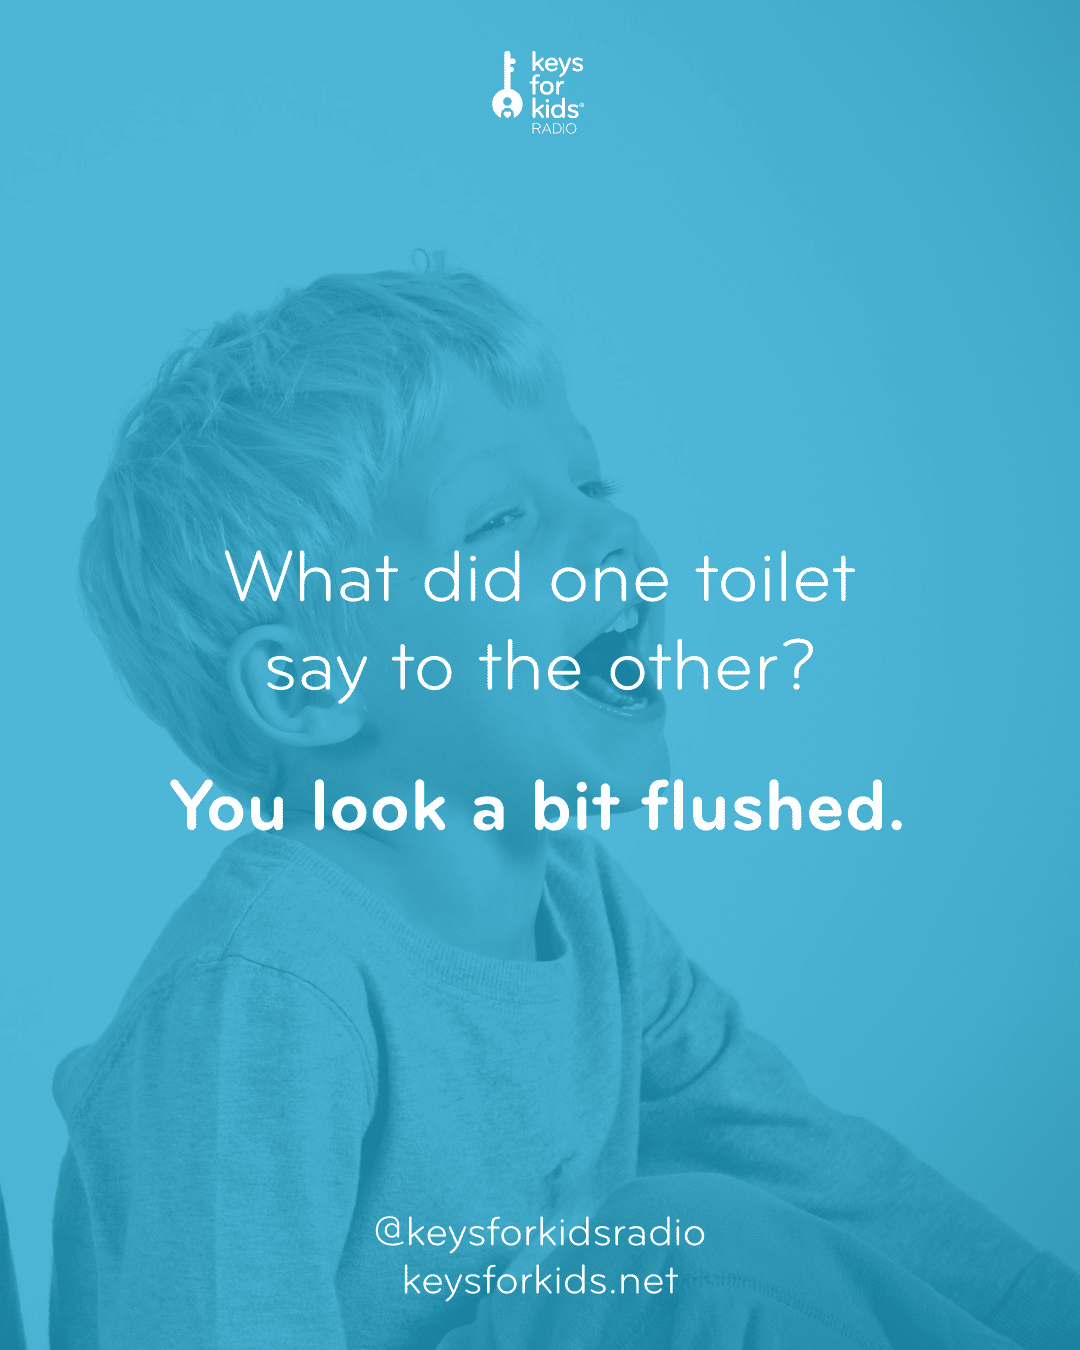 What did one toilet say to the other? You look a bit flushed.